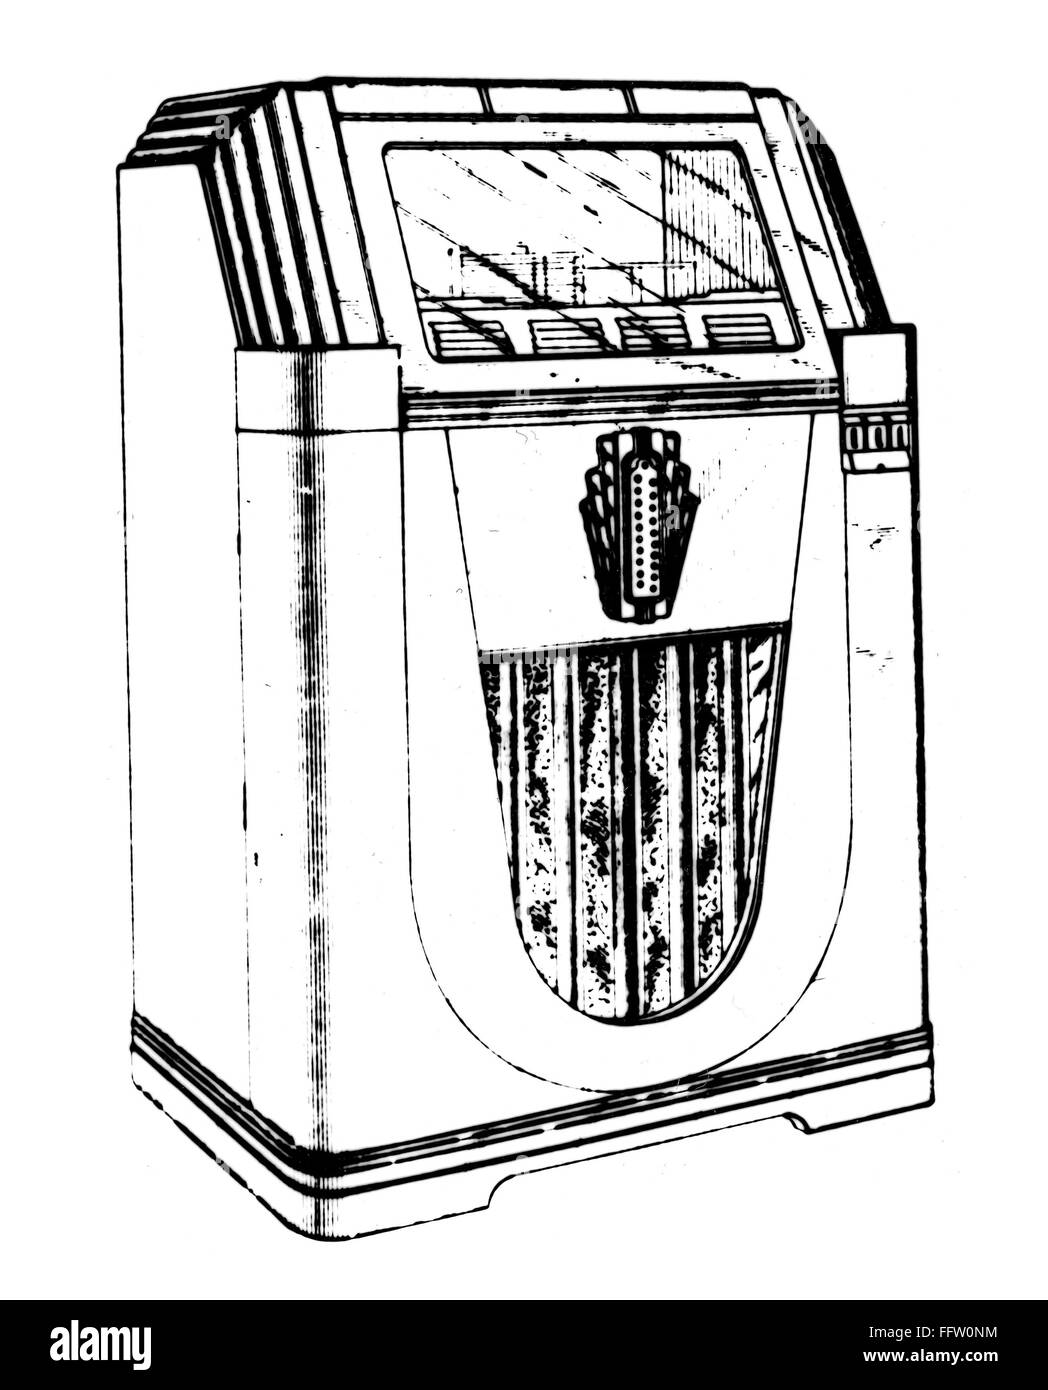 JUKEBOX, 1938. /nA 1938 model MH-20 Monarch jukebox, manufactured by the Rock-Ola Manufacturing Company of Chicago, Illinois. Line engraving. Stock Photo